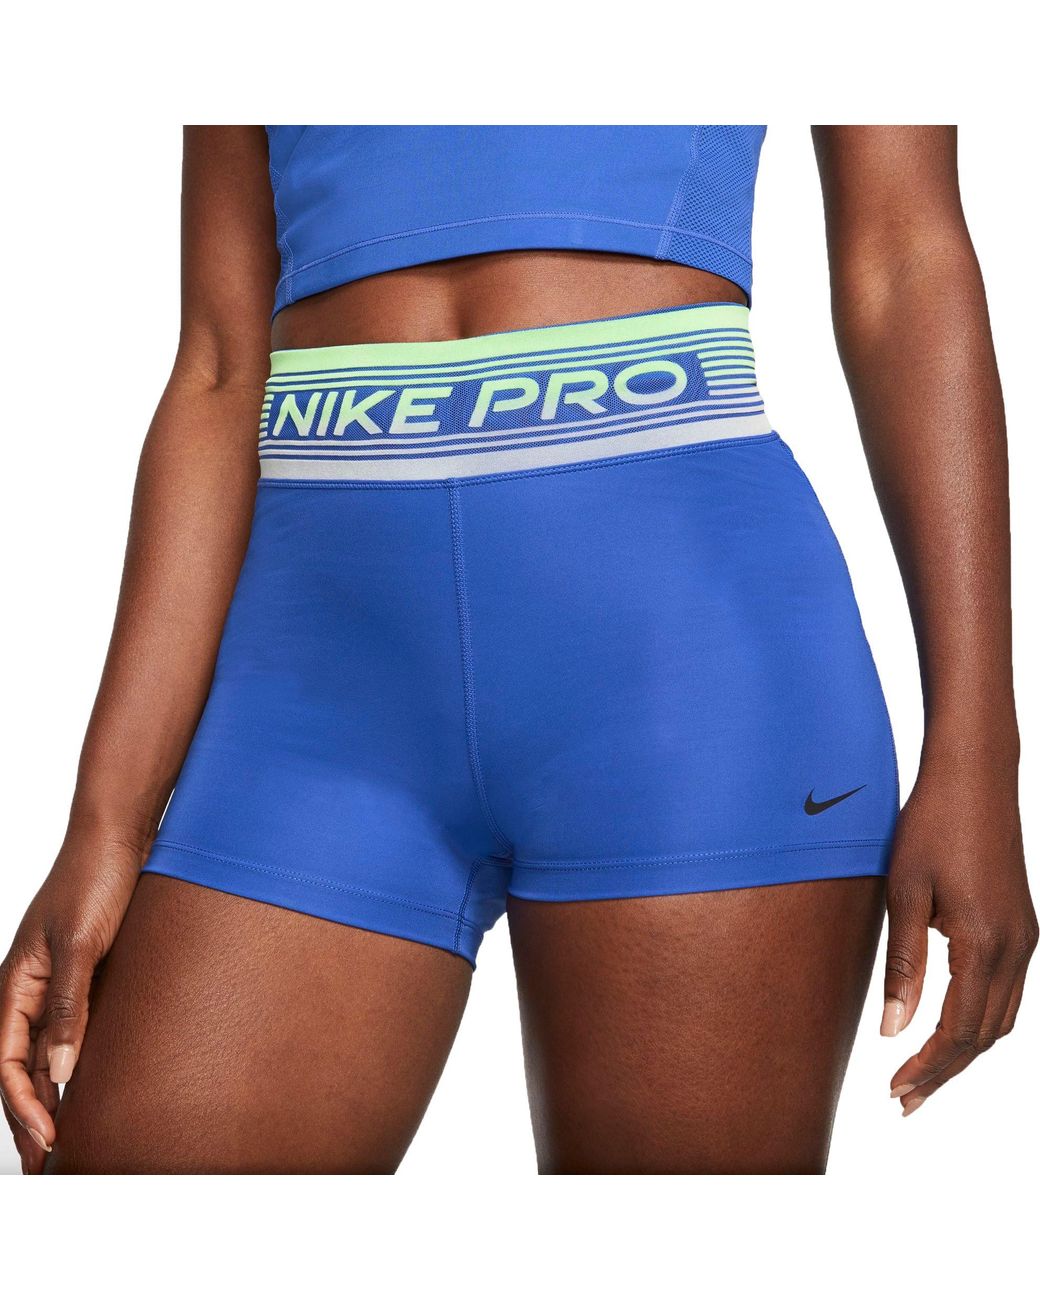 Nike Pro Dri-fit Support Shorts in Blue - Lyst